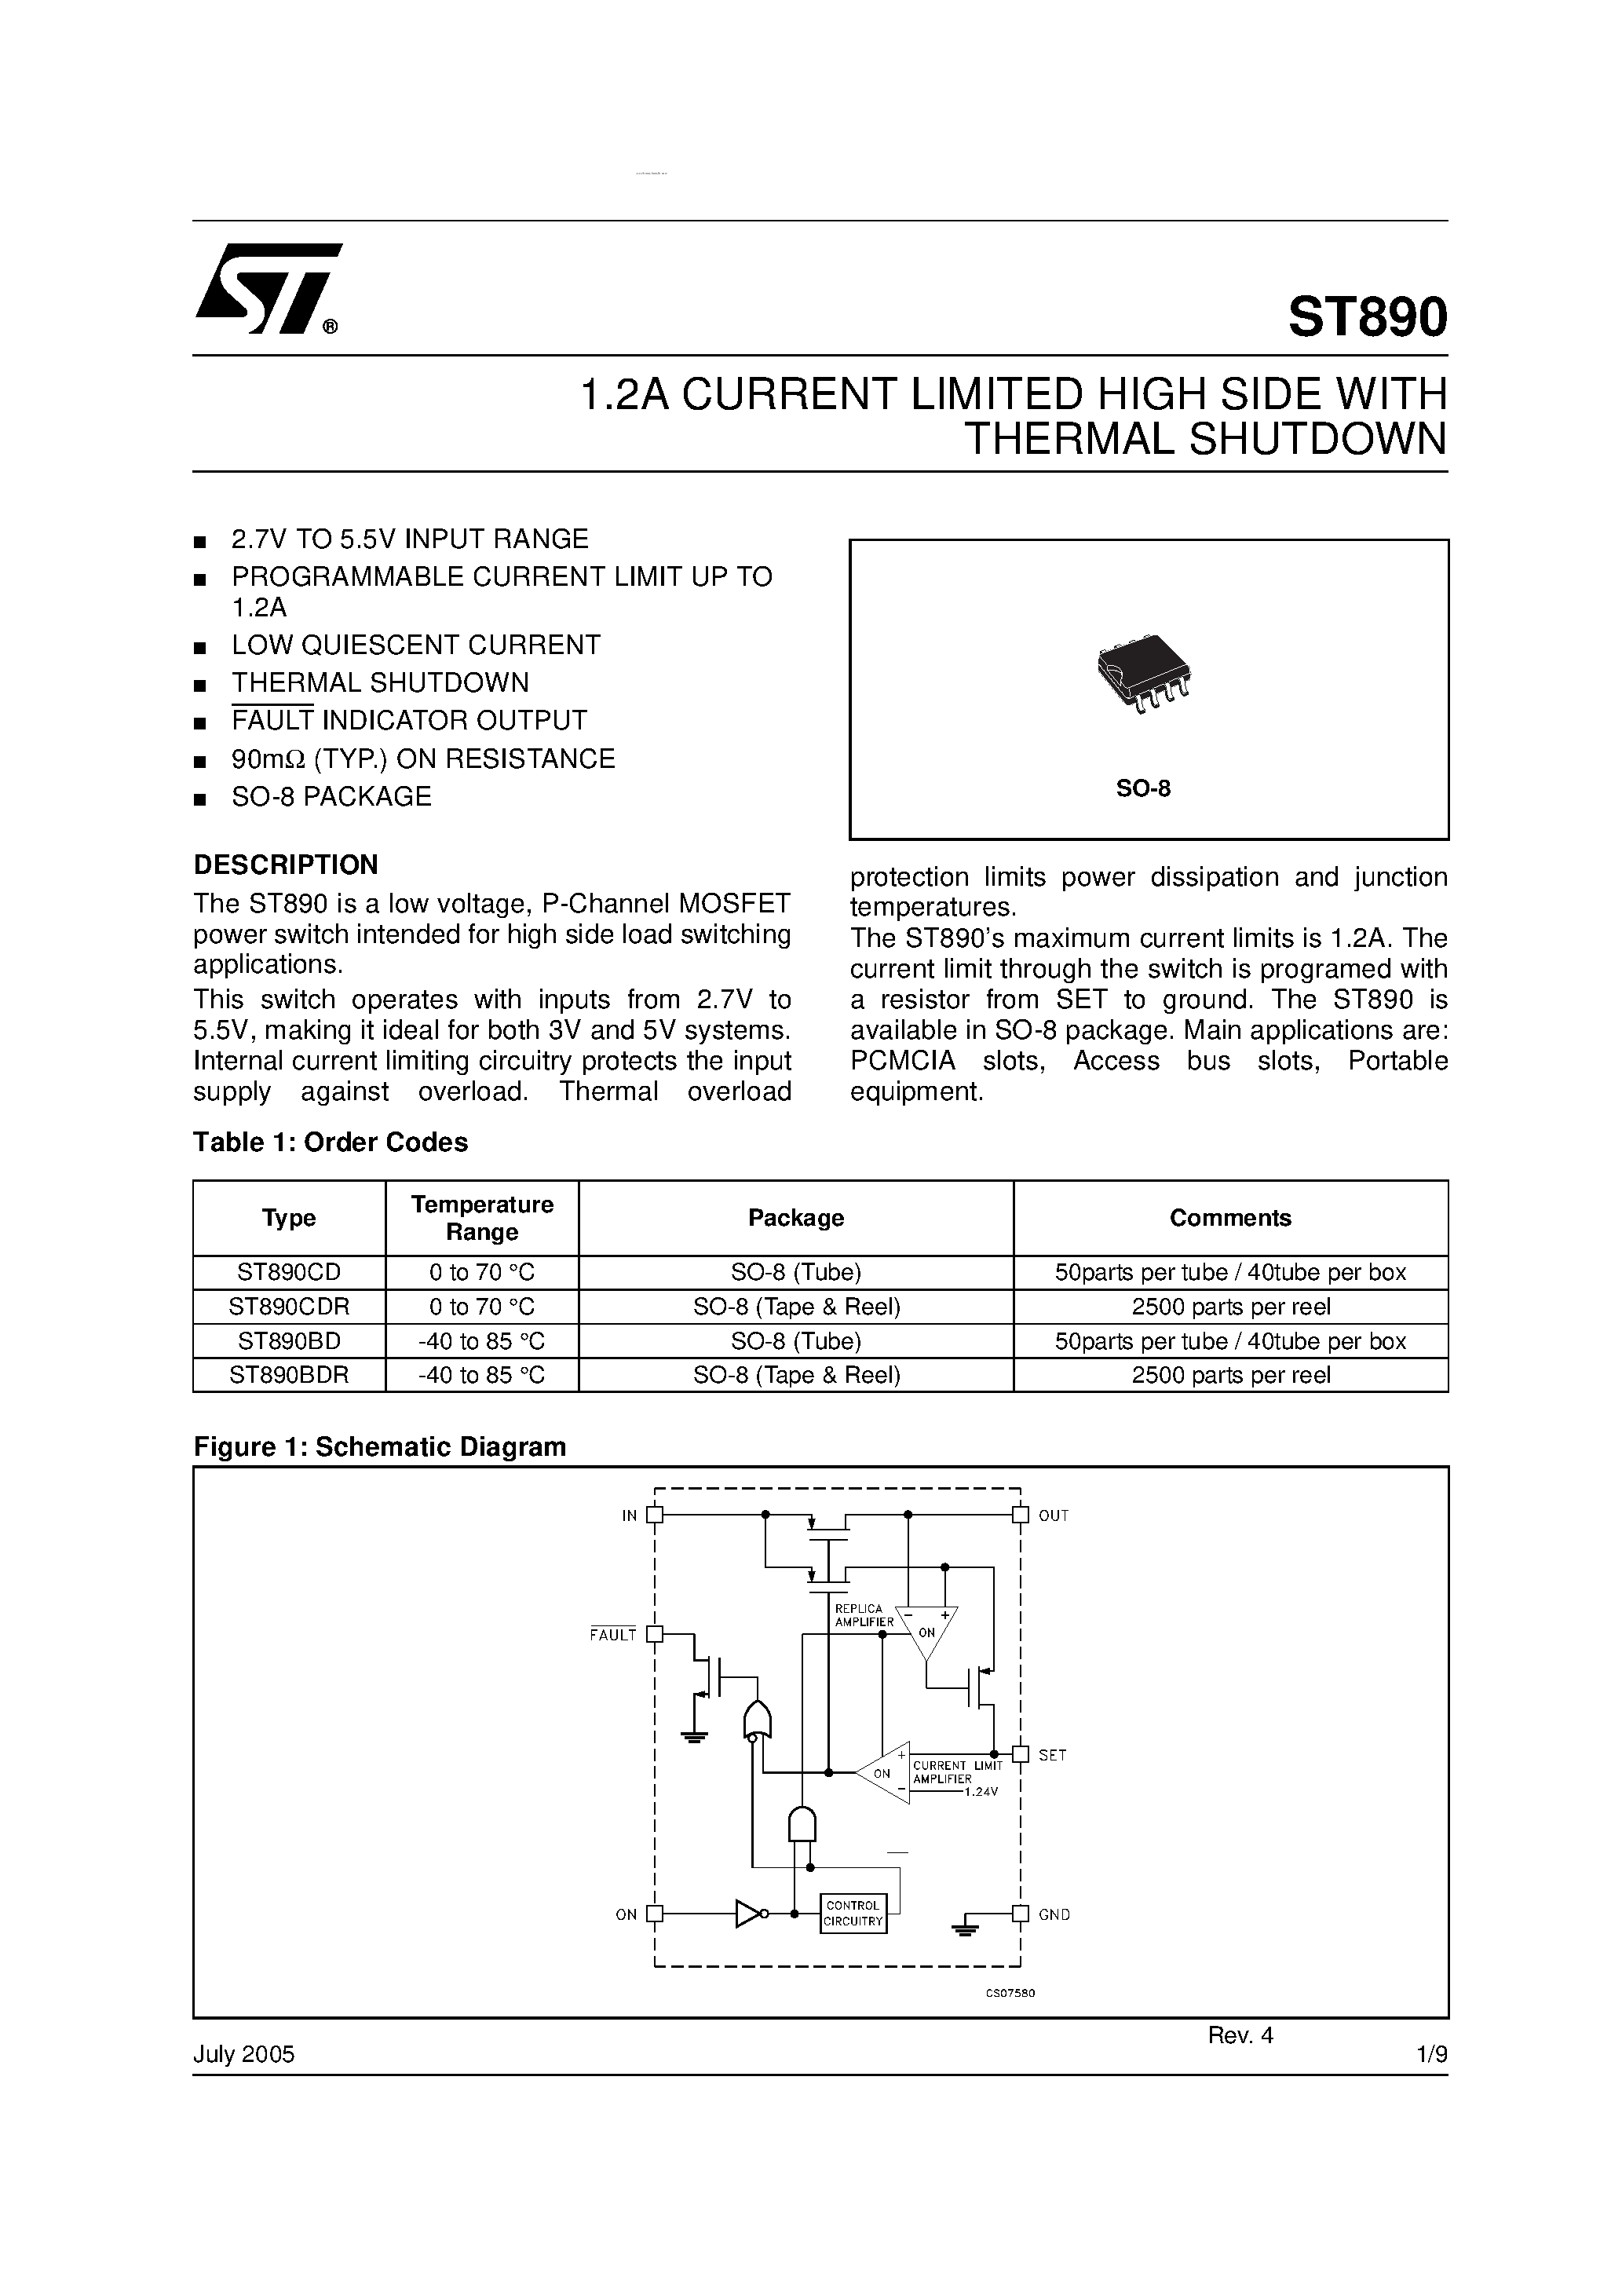 Datasheet ST890 - 1.2A CURRENT LIMITED HIGH SIDE page 1